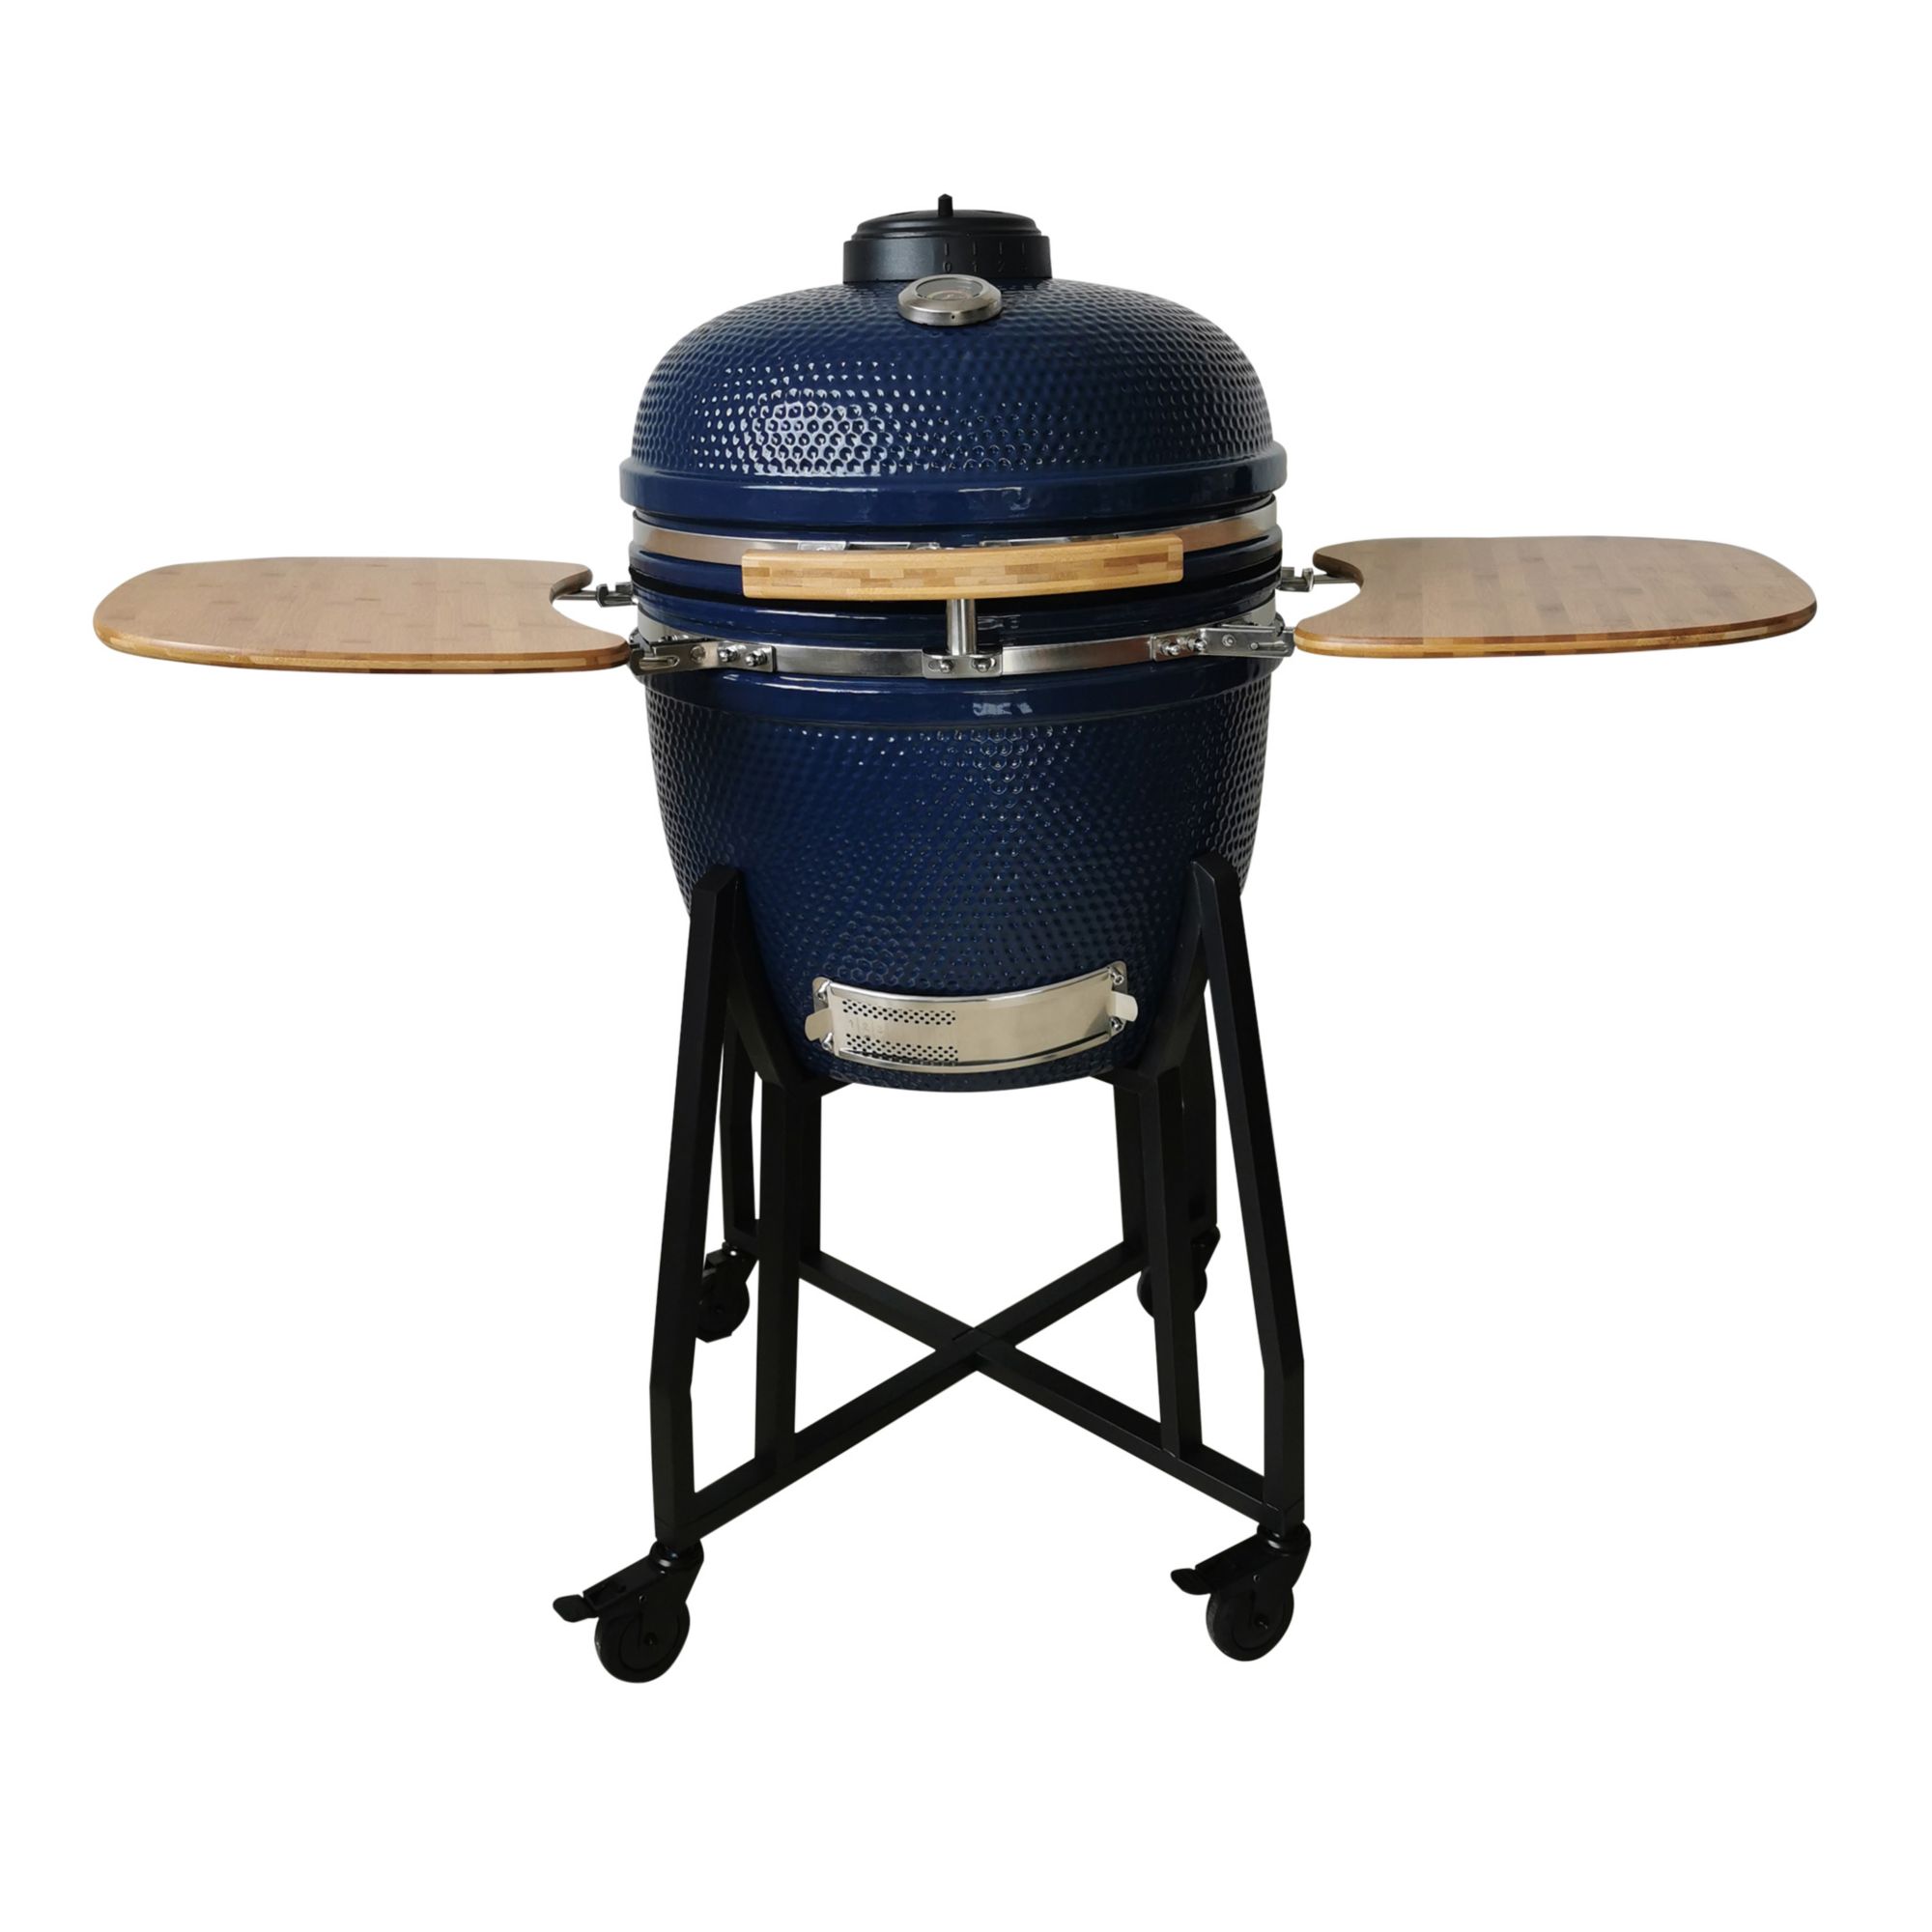 BJ's Wholesale Club: Lifesmart 21" Kamado Grill with Grill Cover and Bonus Deluxe Accessory Package - $350 YMMV